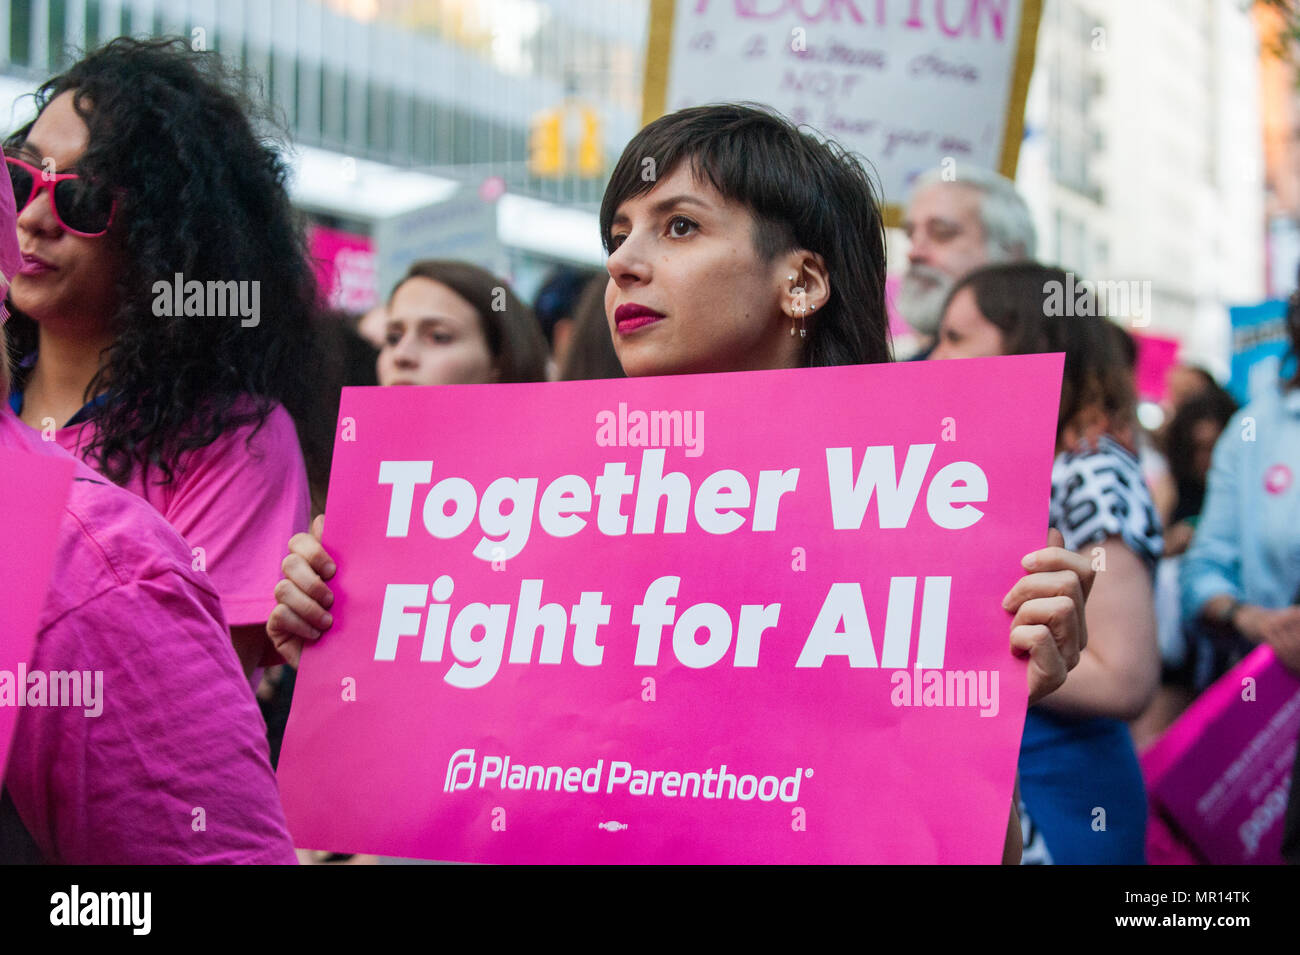 Supporters with signs at a Title X (Title Ten) gag rule rally in New York City, hosted by Planned Parenthood of New York City on May 24th 2018, reacting the President Trump's attempt to ban Medicaid and federal funding to medical providers who provide full, legal medical information to patients wanting or needing abortion services. Stock Photo